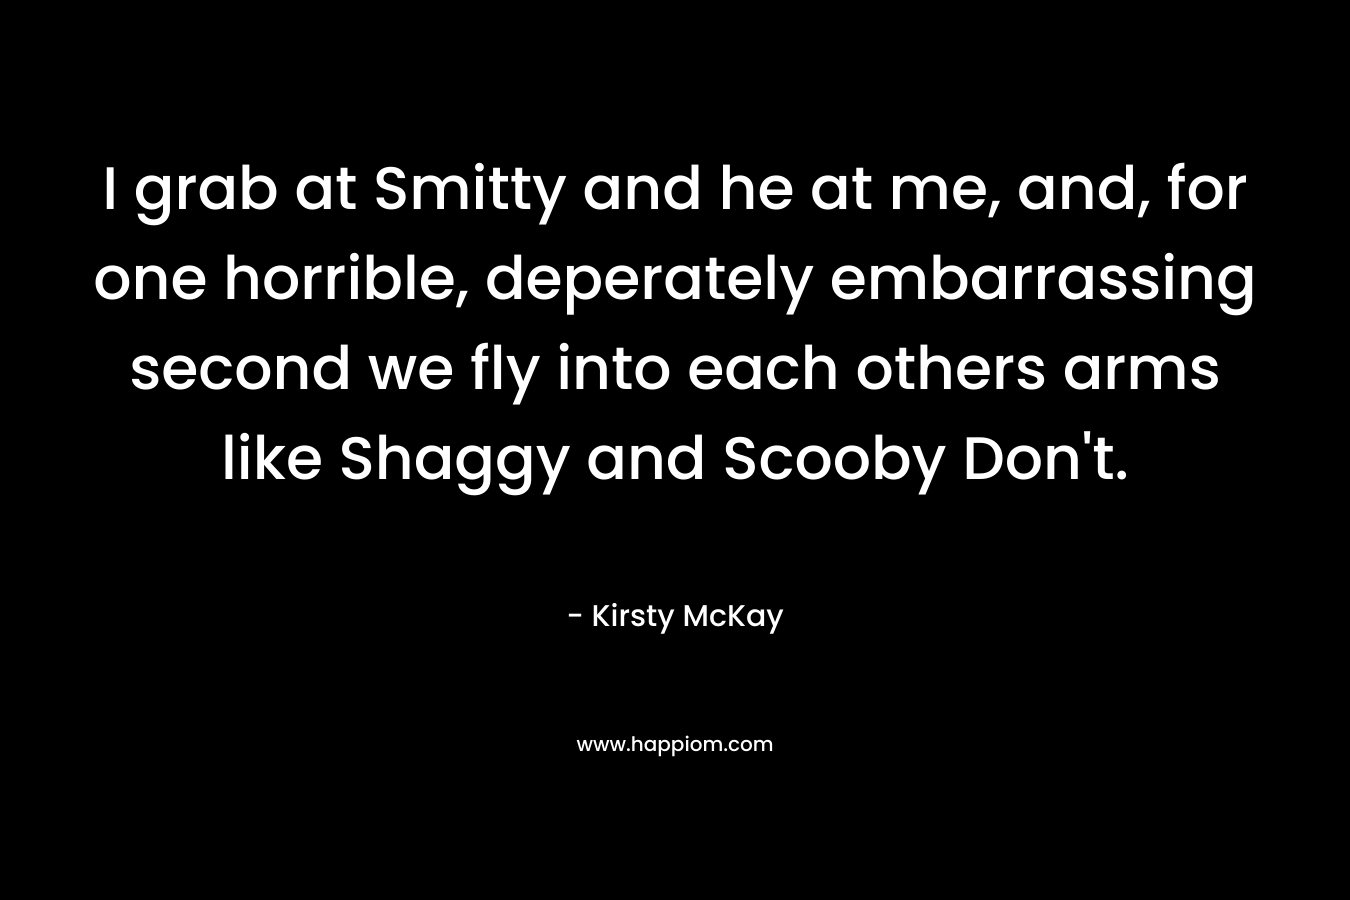 I grab at Smitty and he at me, and, for one horrible, deperately embarrassing second we fly into each others arms like Shaggy and Scooby Don’t. – Kirsty McKay